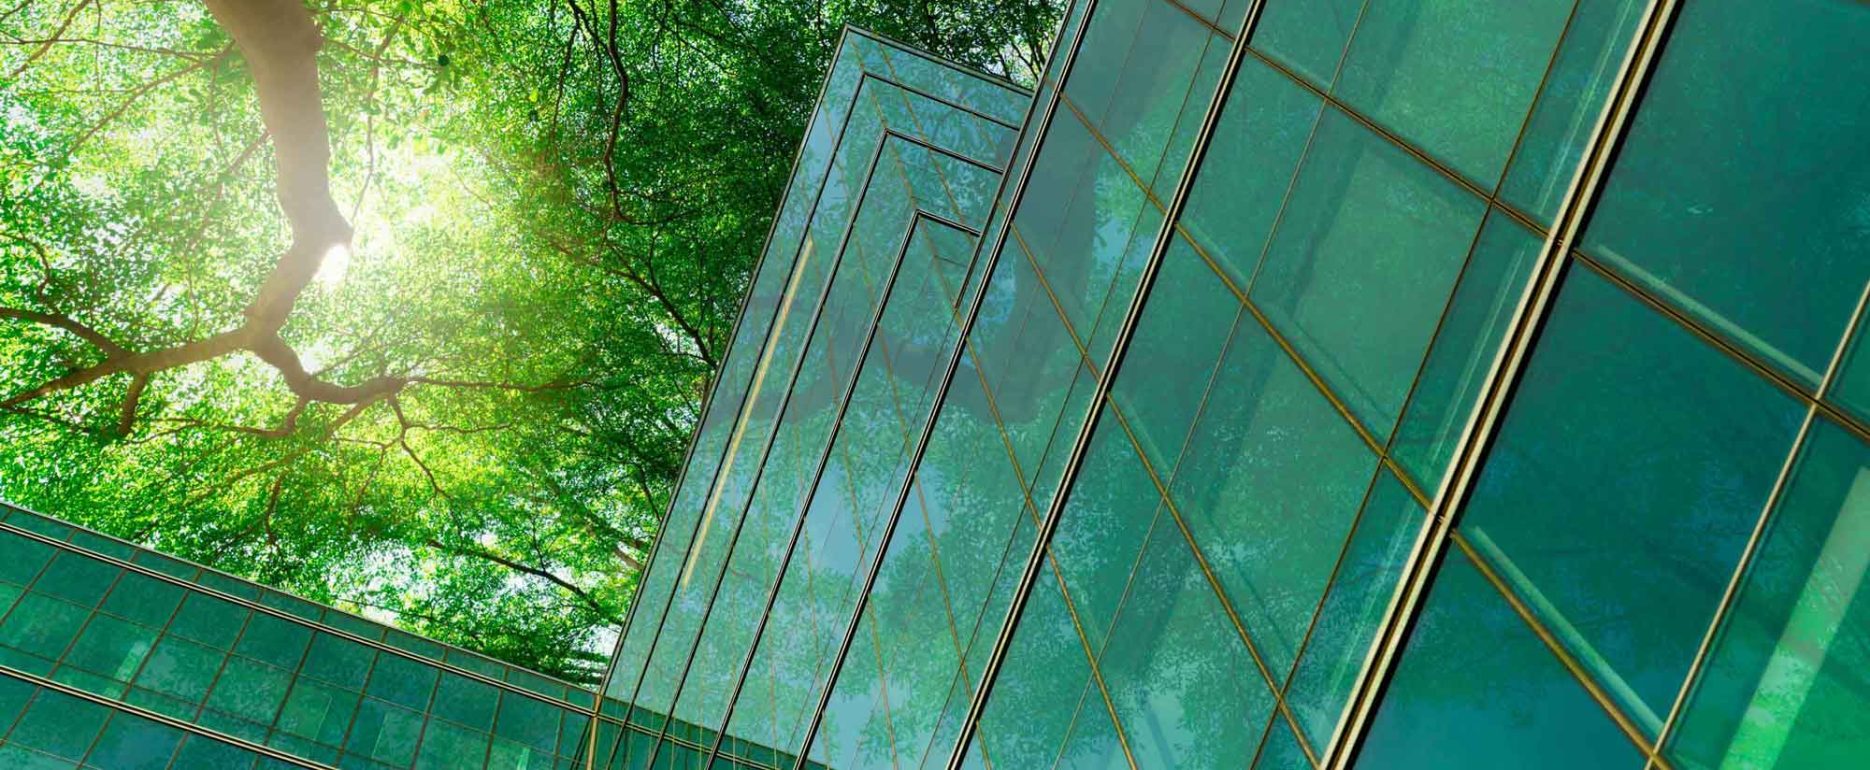 tree branches with leaves and sustainable glass building